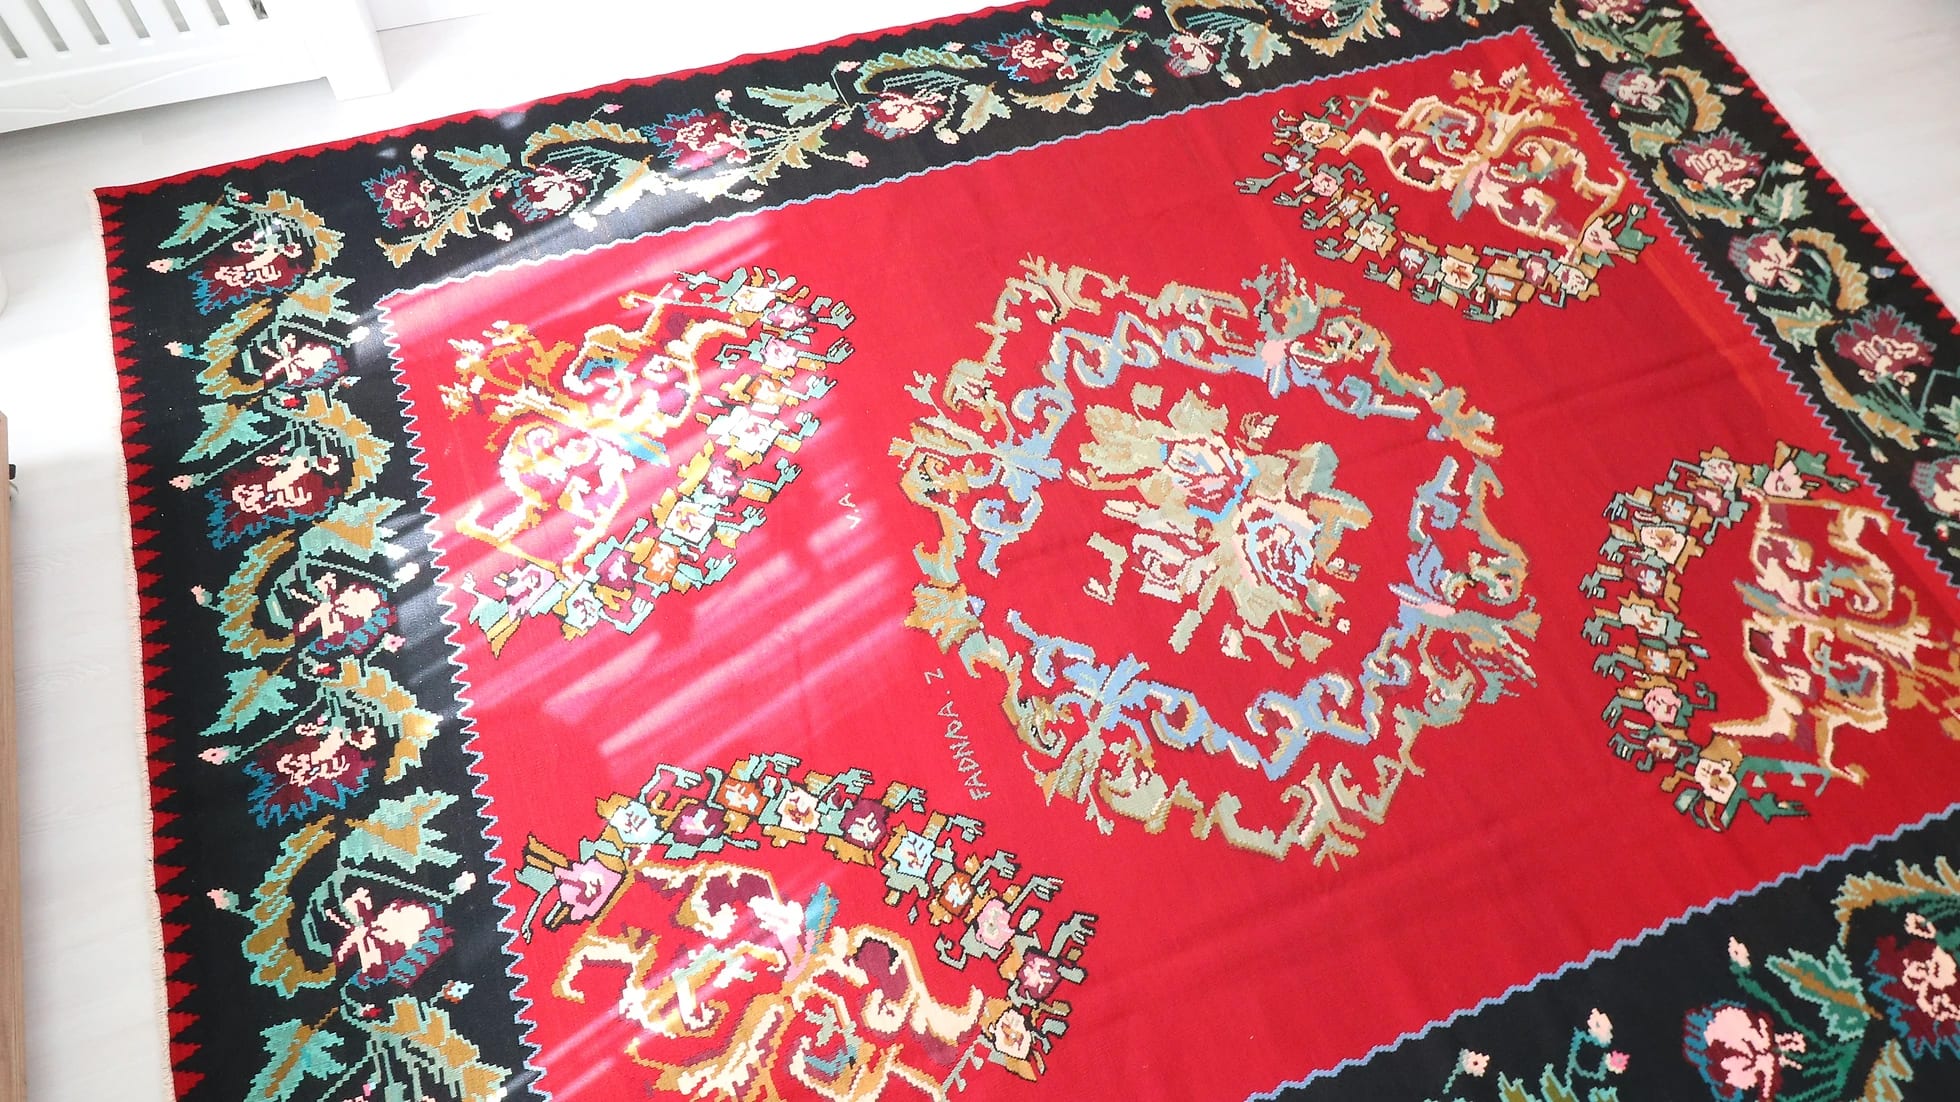 Vintage Handwoven Bessarabian Kilim Rug in red shades with floral design signed by the artisan